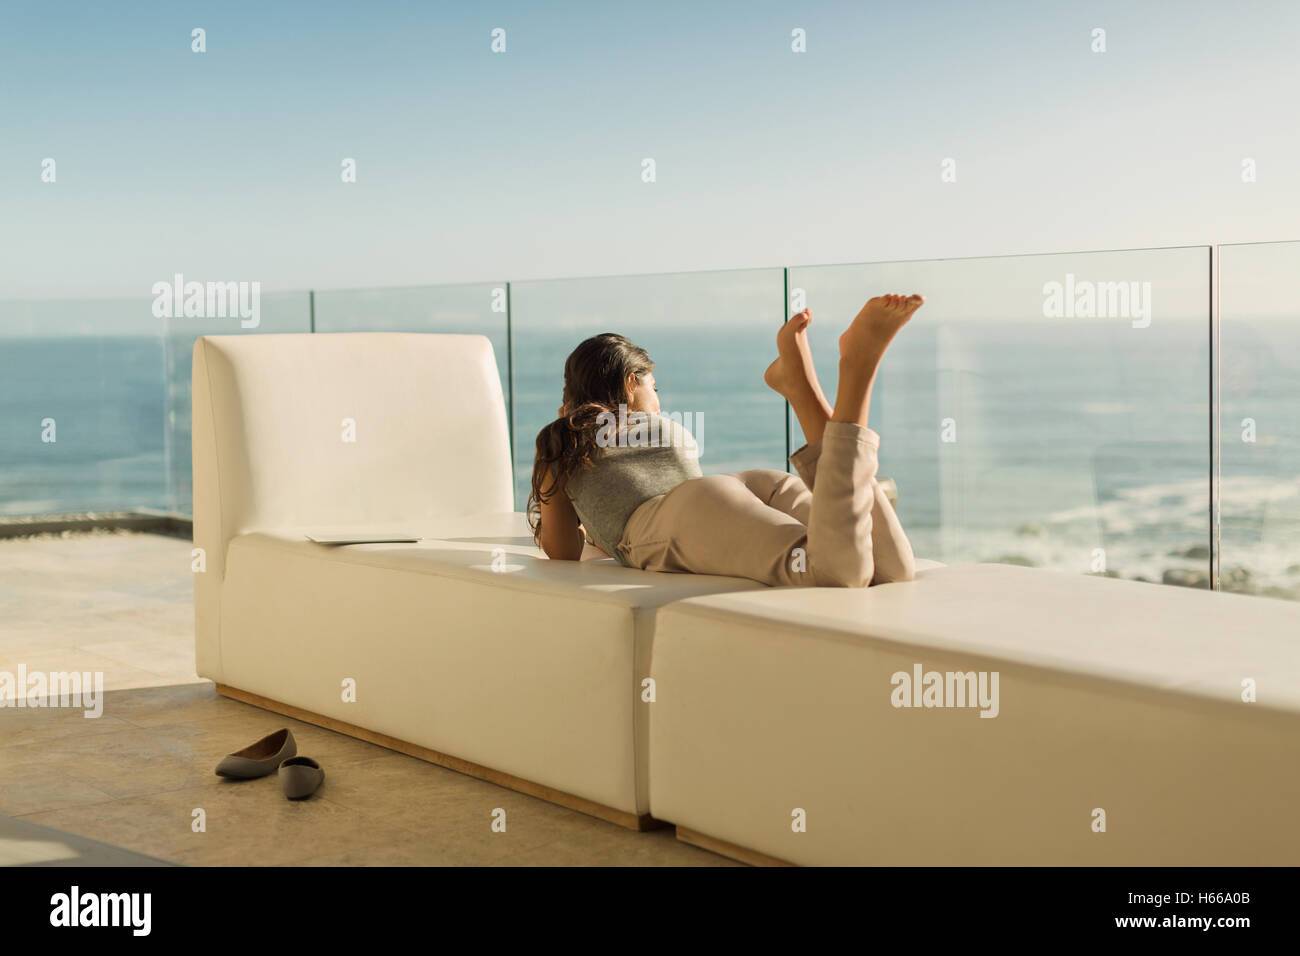 Woman on luxury balcony relaxing laying on bench looking at sunny ocean view Stock Photo